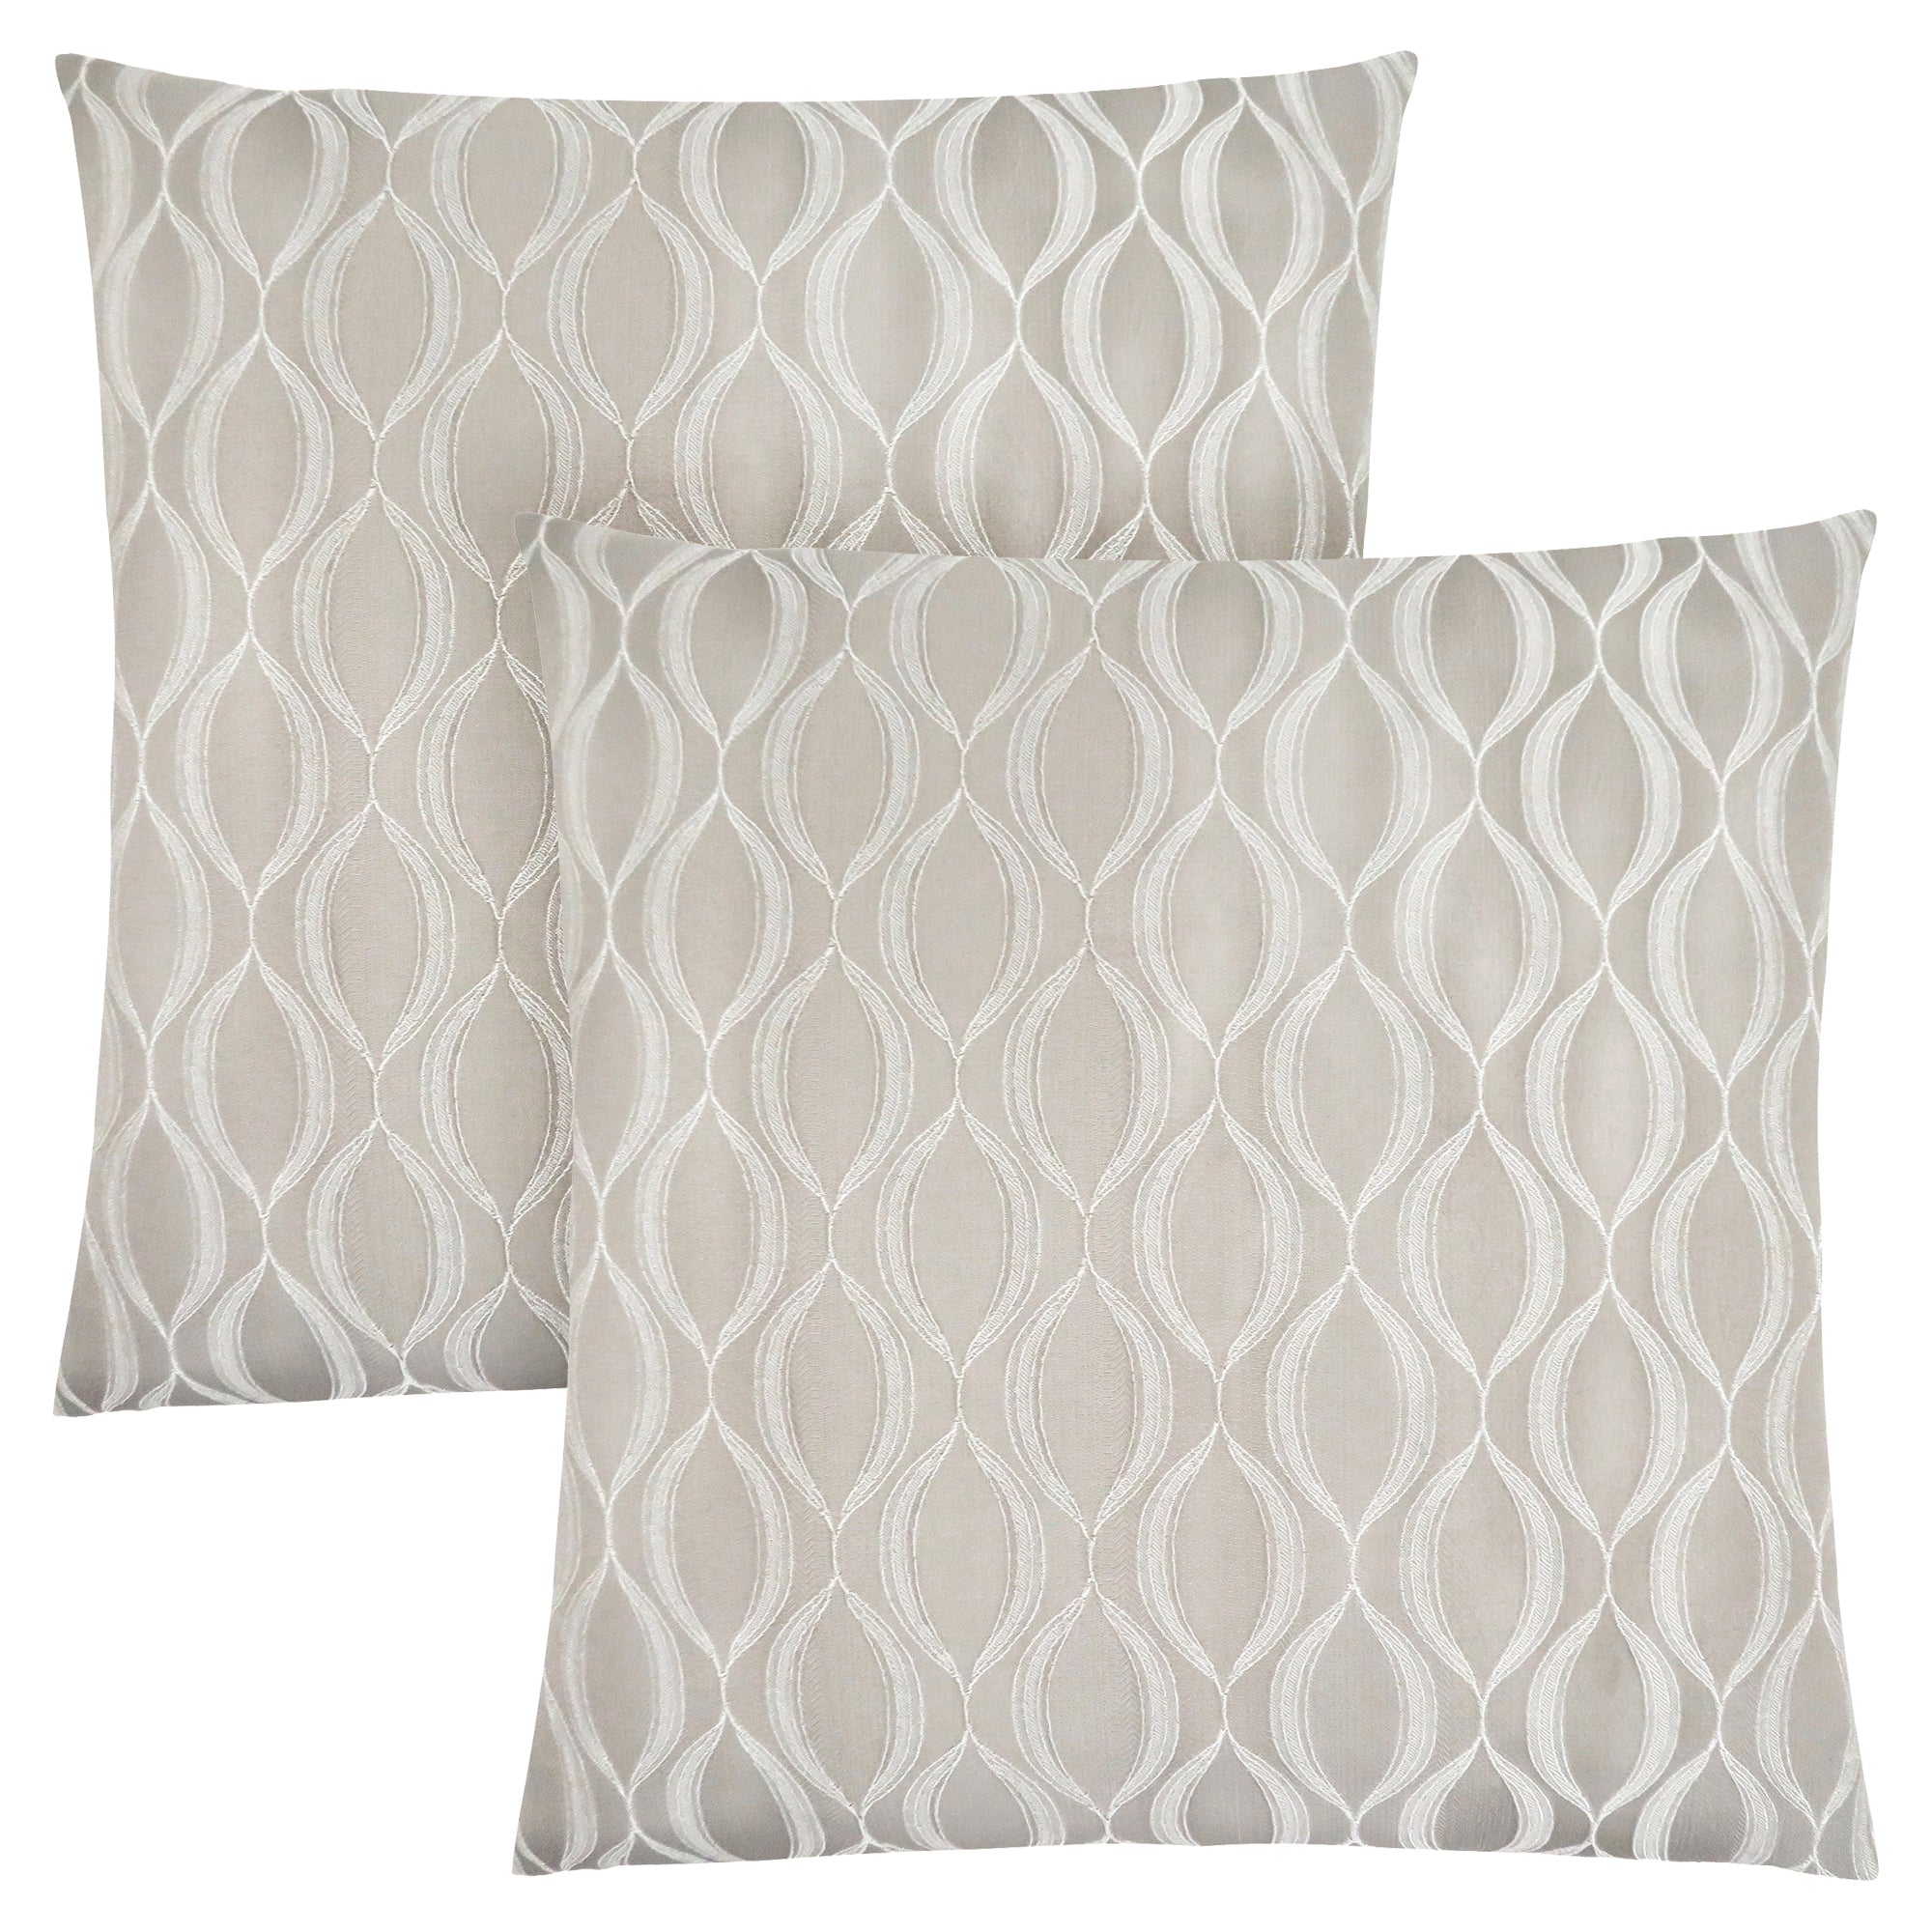 MN-879345    Pillows, Set Of 2, 18 X 18 Square, Insert Included, Decorative Throw, Accent, Sofa, Couch, Bed, Soft Polyester Fabric, Hypoallergenic Soft Polyester Insert, Taupe, Classic